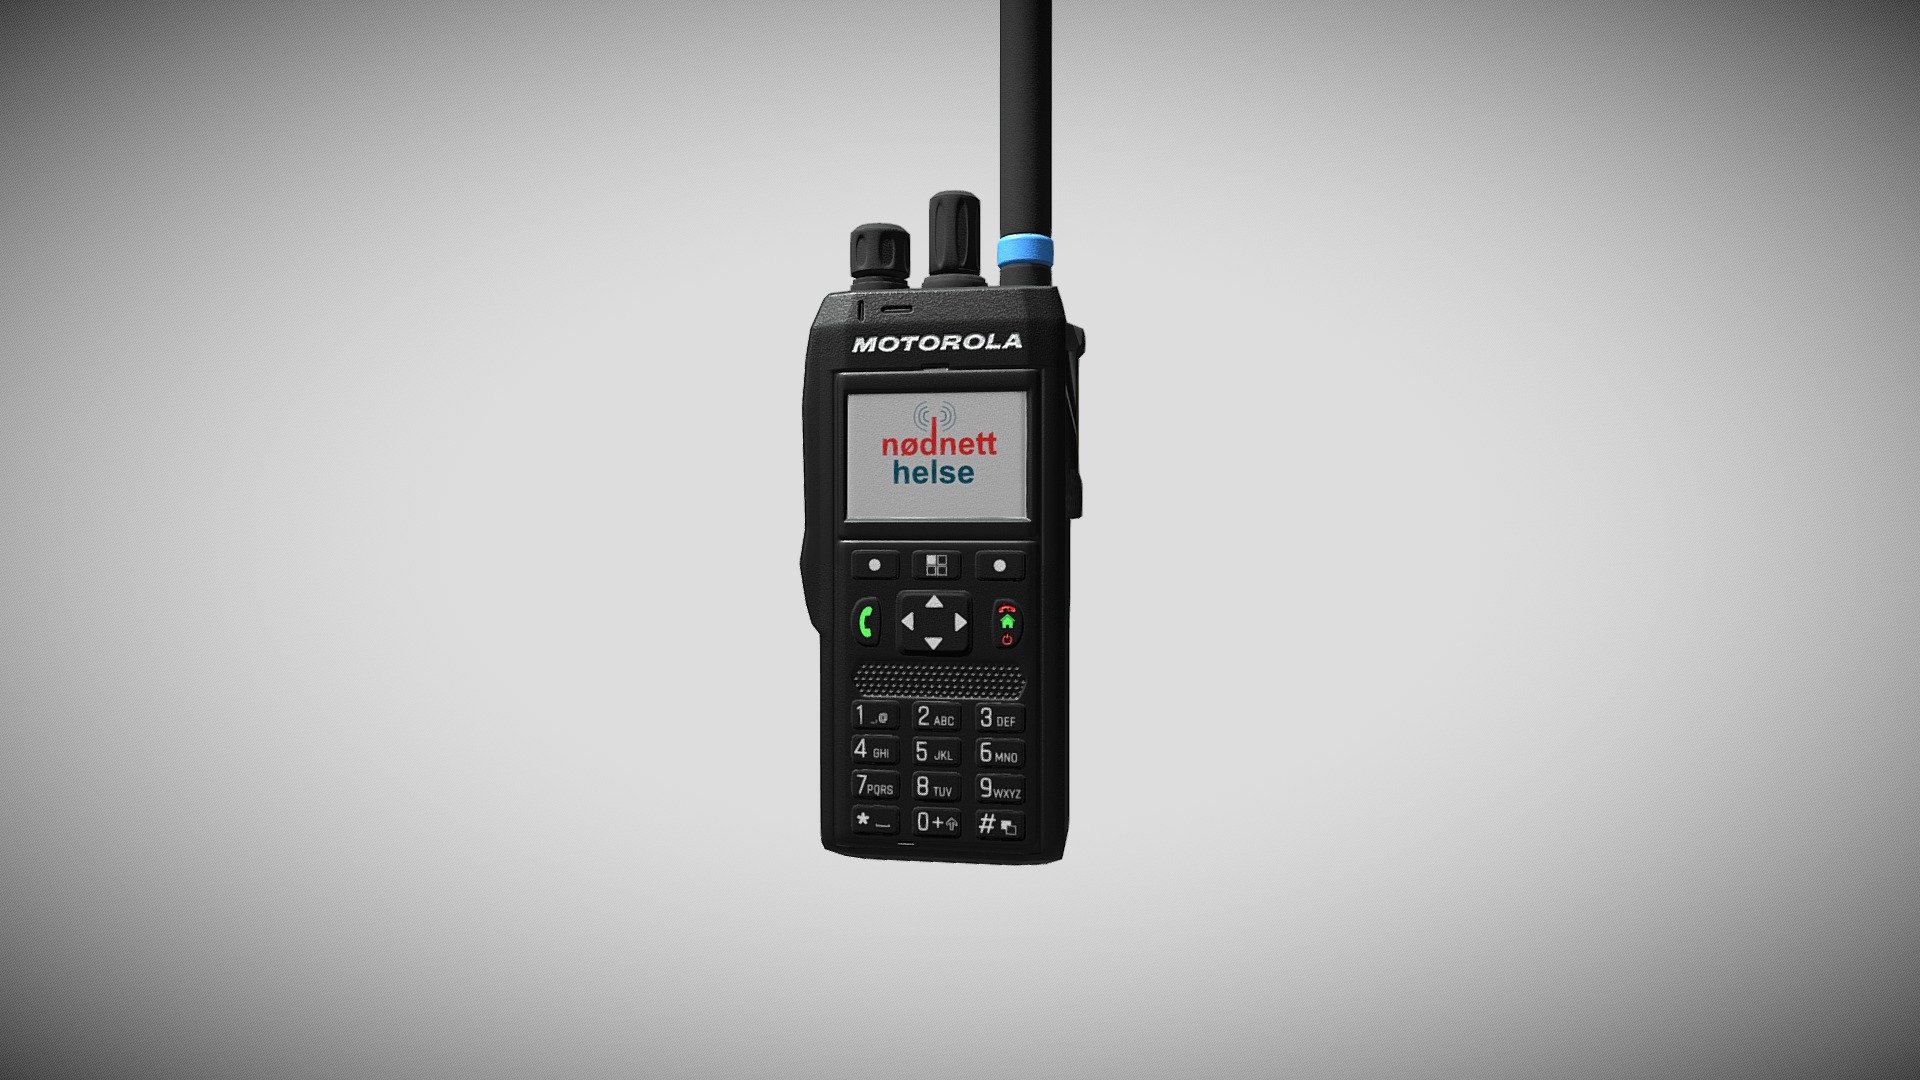 Made a Norwegian radio the emergency system the emergency services from norway uses.
Based on this one
https://www.euroworker.no/images/detailed/12/Motorola_MTP3250_TETRA_Terminal-MDH62PCF6TZ7BN_bjn1-7y.jpeg - Norwegian Emergency Radio - 3D model by NovelaxNeko (@Christopfer.Dahl) 3d model